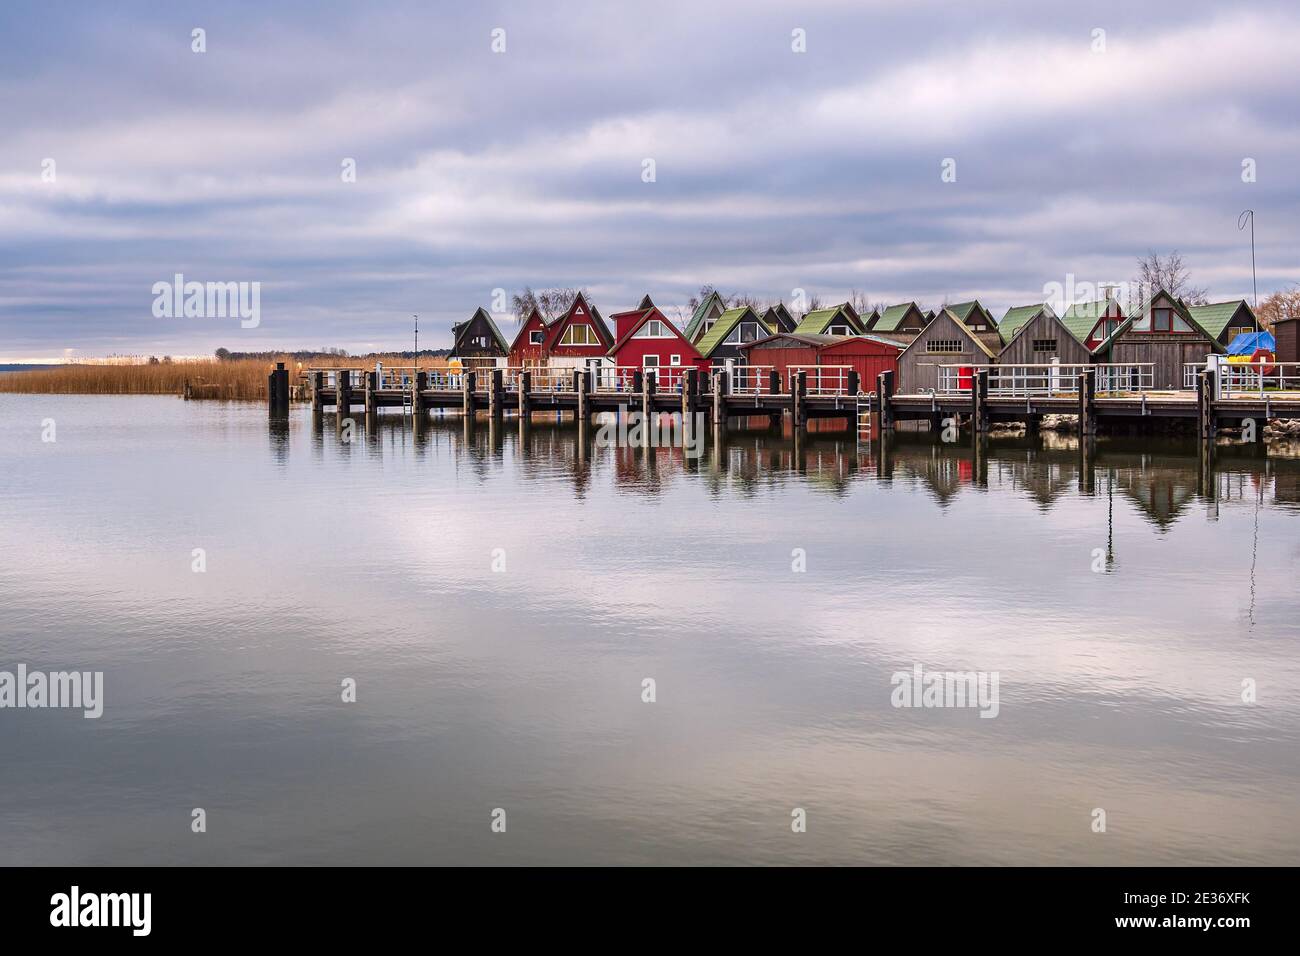 Boathouses in the port of Ahrenshoop, Germany. Stock Photo